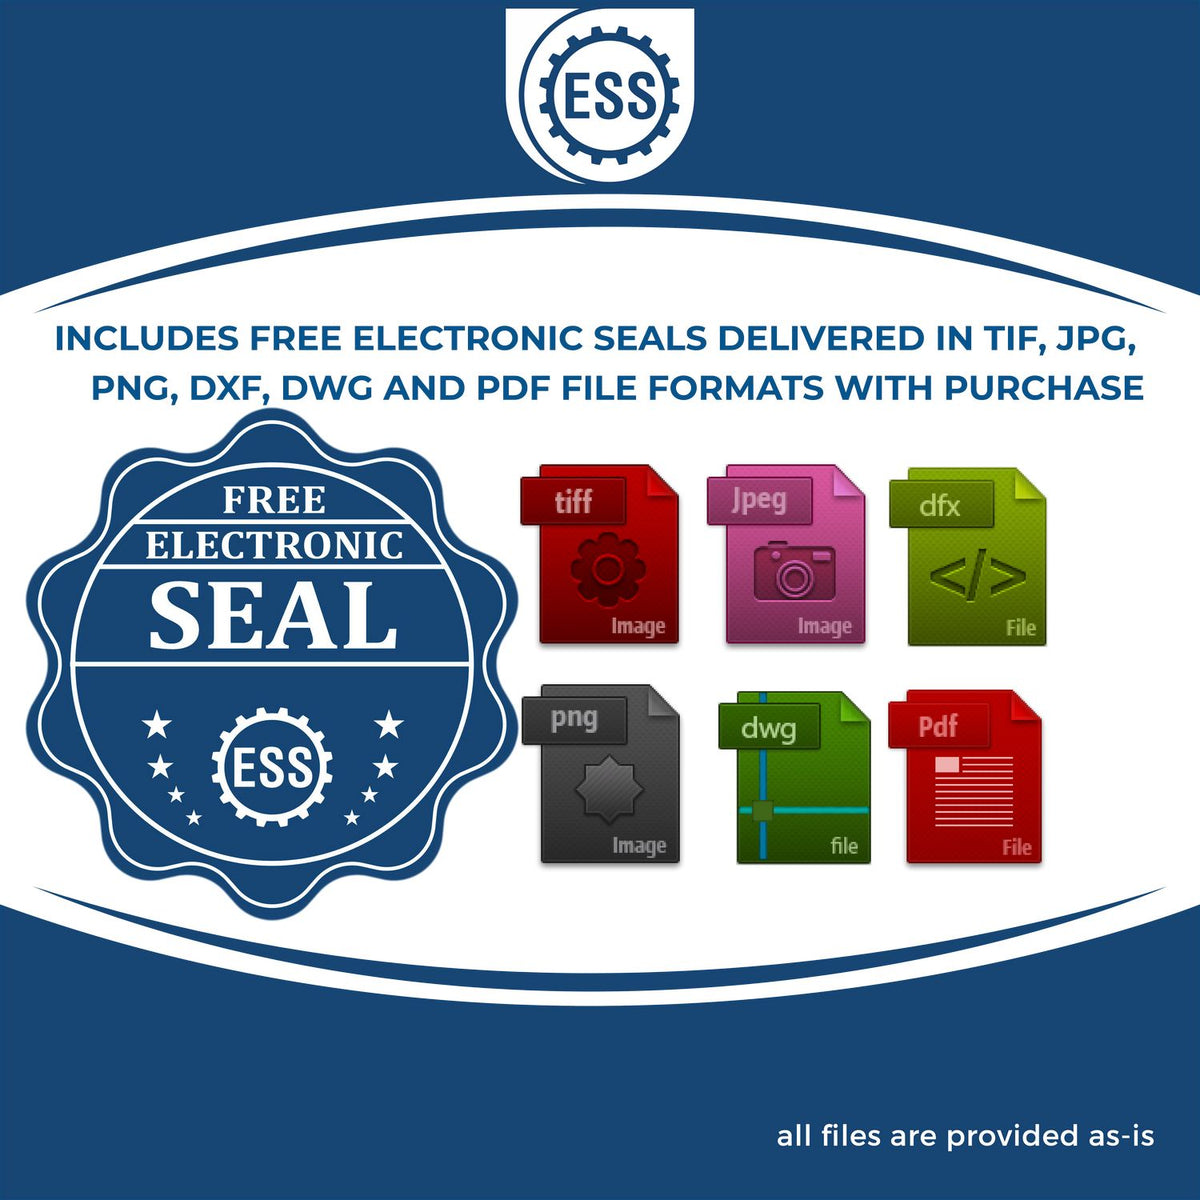 An infographic for the free electronic seal for the Slim Pre-Inked Illinois Landscape Architect Seal Stamp illustrating the different file type icons such as DXF, DWG, TIF, JPG and PNG.